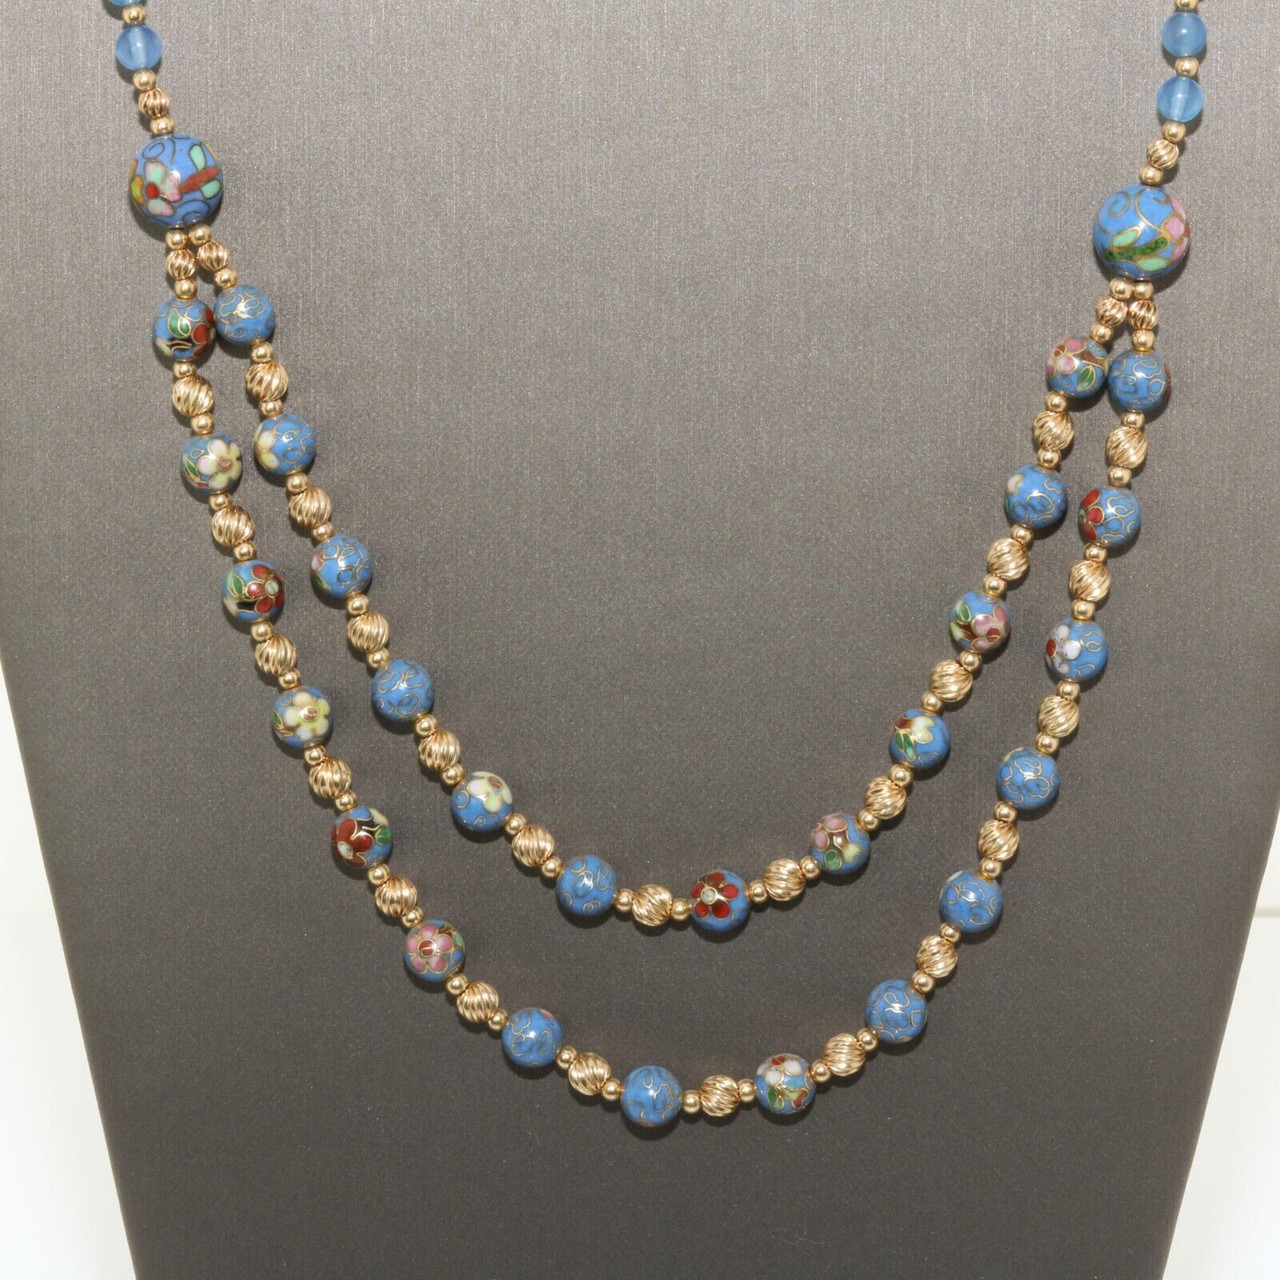 Pearlish Metallic Finish Glass Beads Necklace With Oxidised Silver Pendant,  Royal Blue